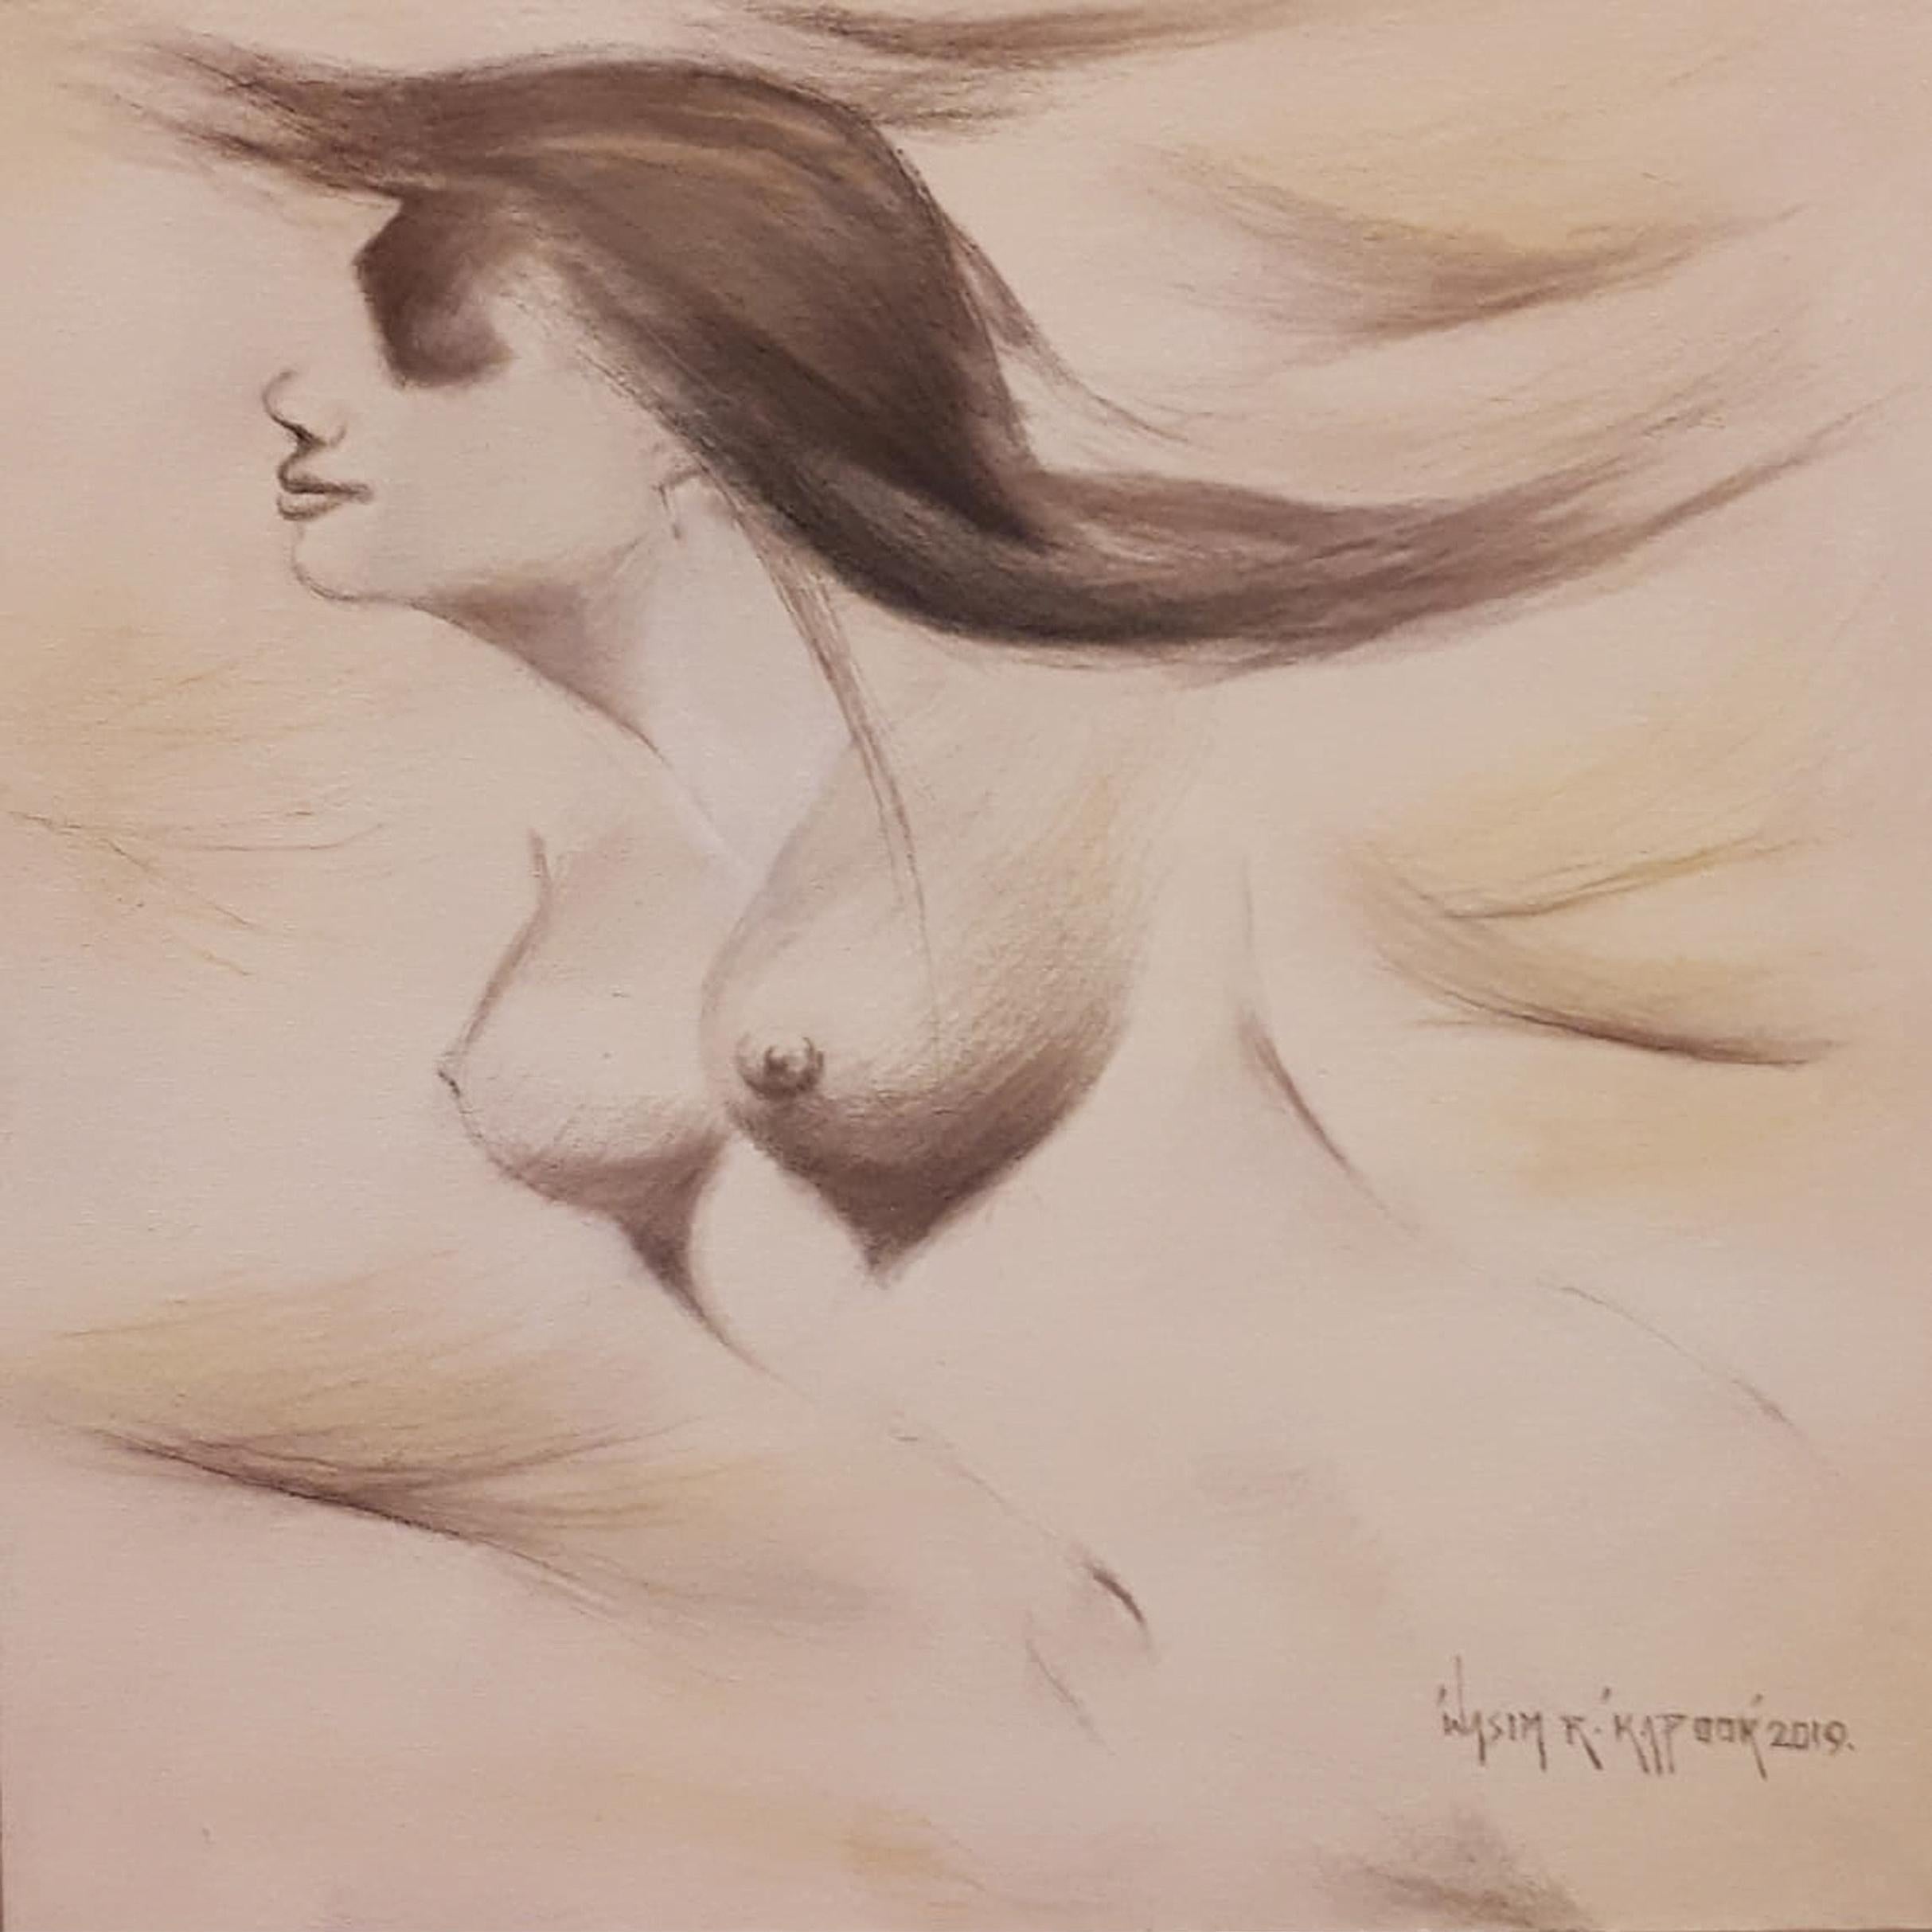 Wasim Kapoor Nude Painting - Nude Woman, Drawing, Conte on Canvas, Brown by Indian Artist "In Stock"